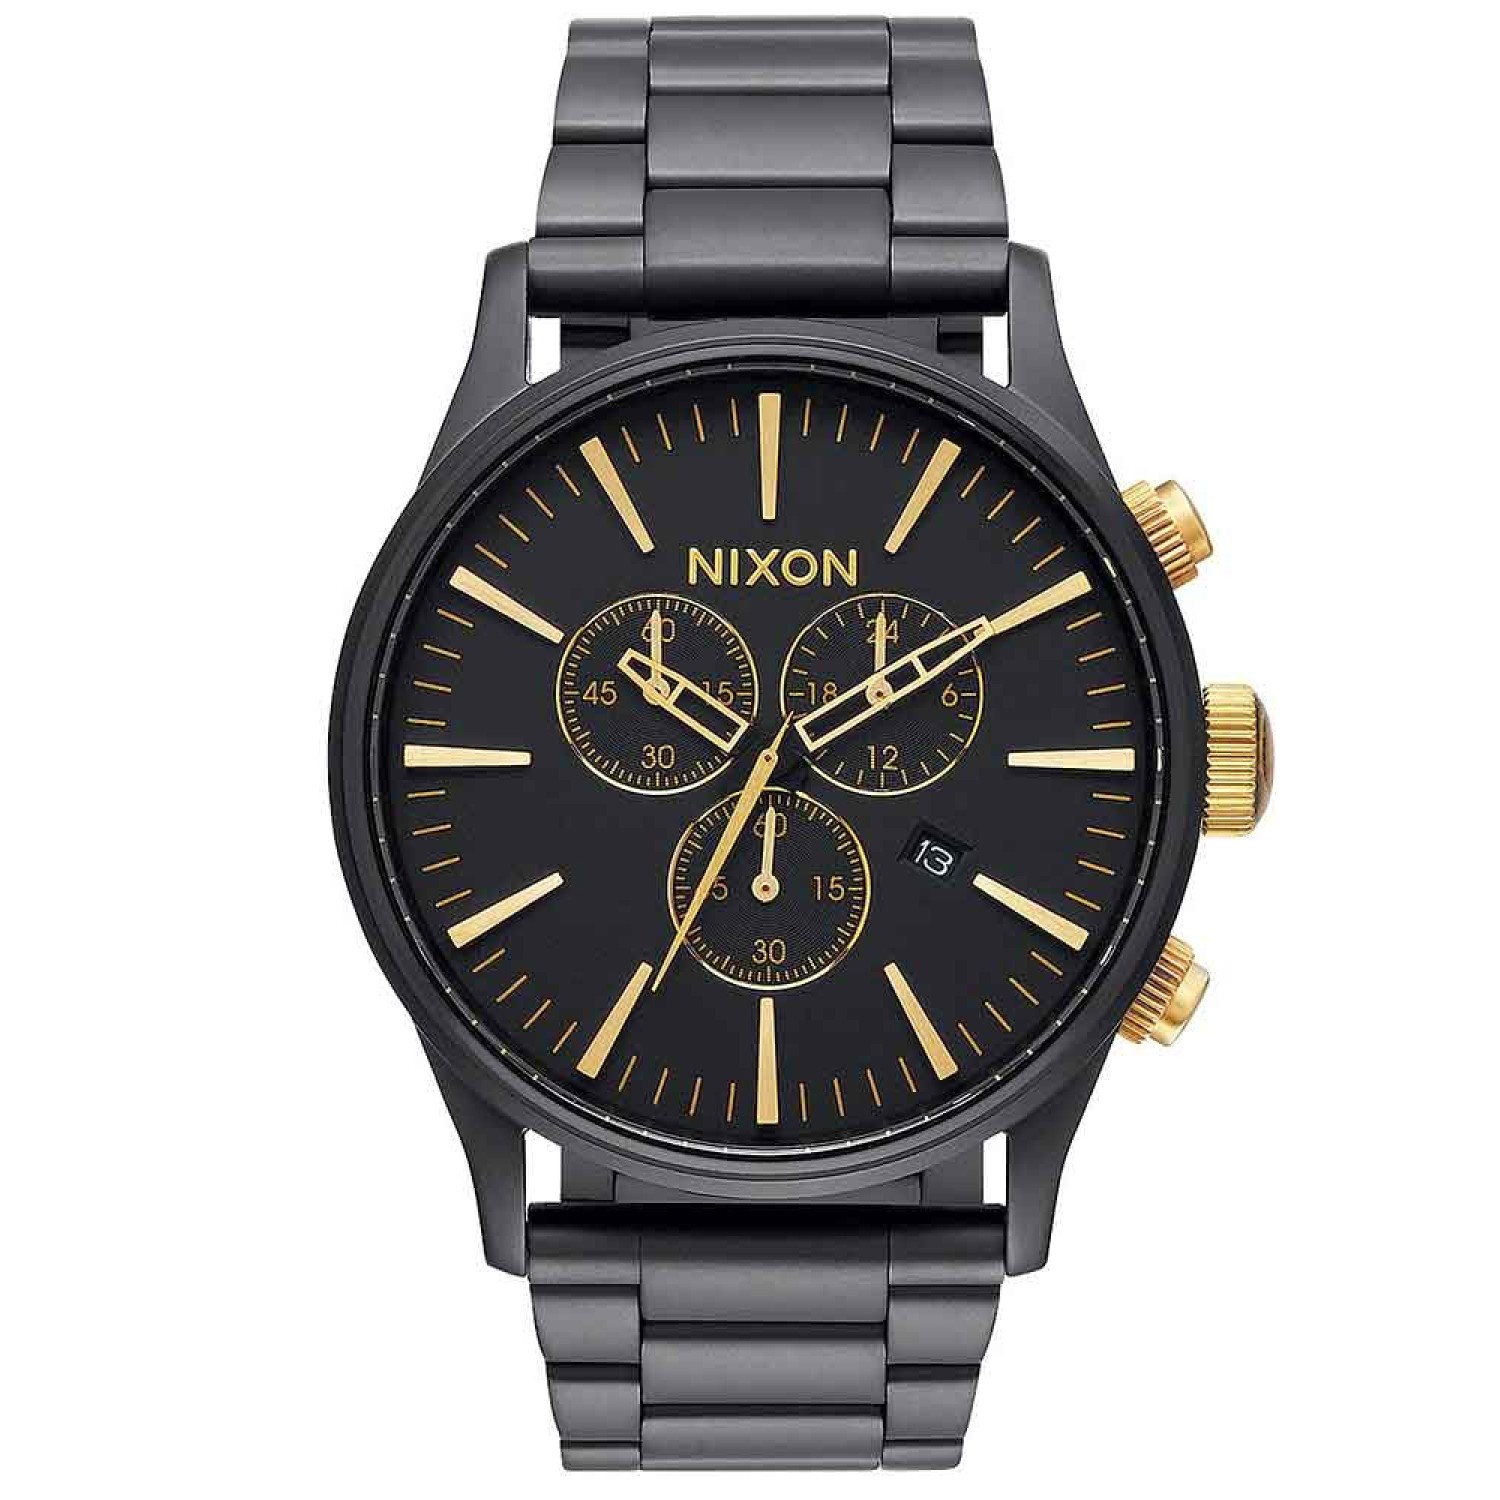 A3861041 NIXON Mens SENTRY Chronograph Watch. Anything but standard, this custom-built chronograph helps strike a rugged balance of technical functionality and elevated style.2 Year  Guarantee 3 Months No Payments and Interest for Q Card holders This watc